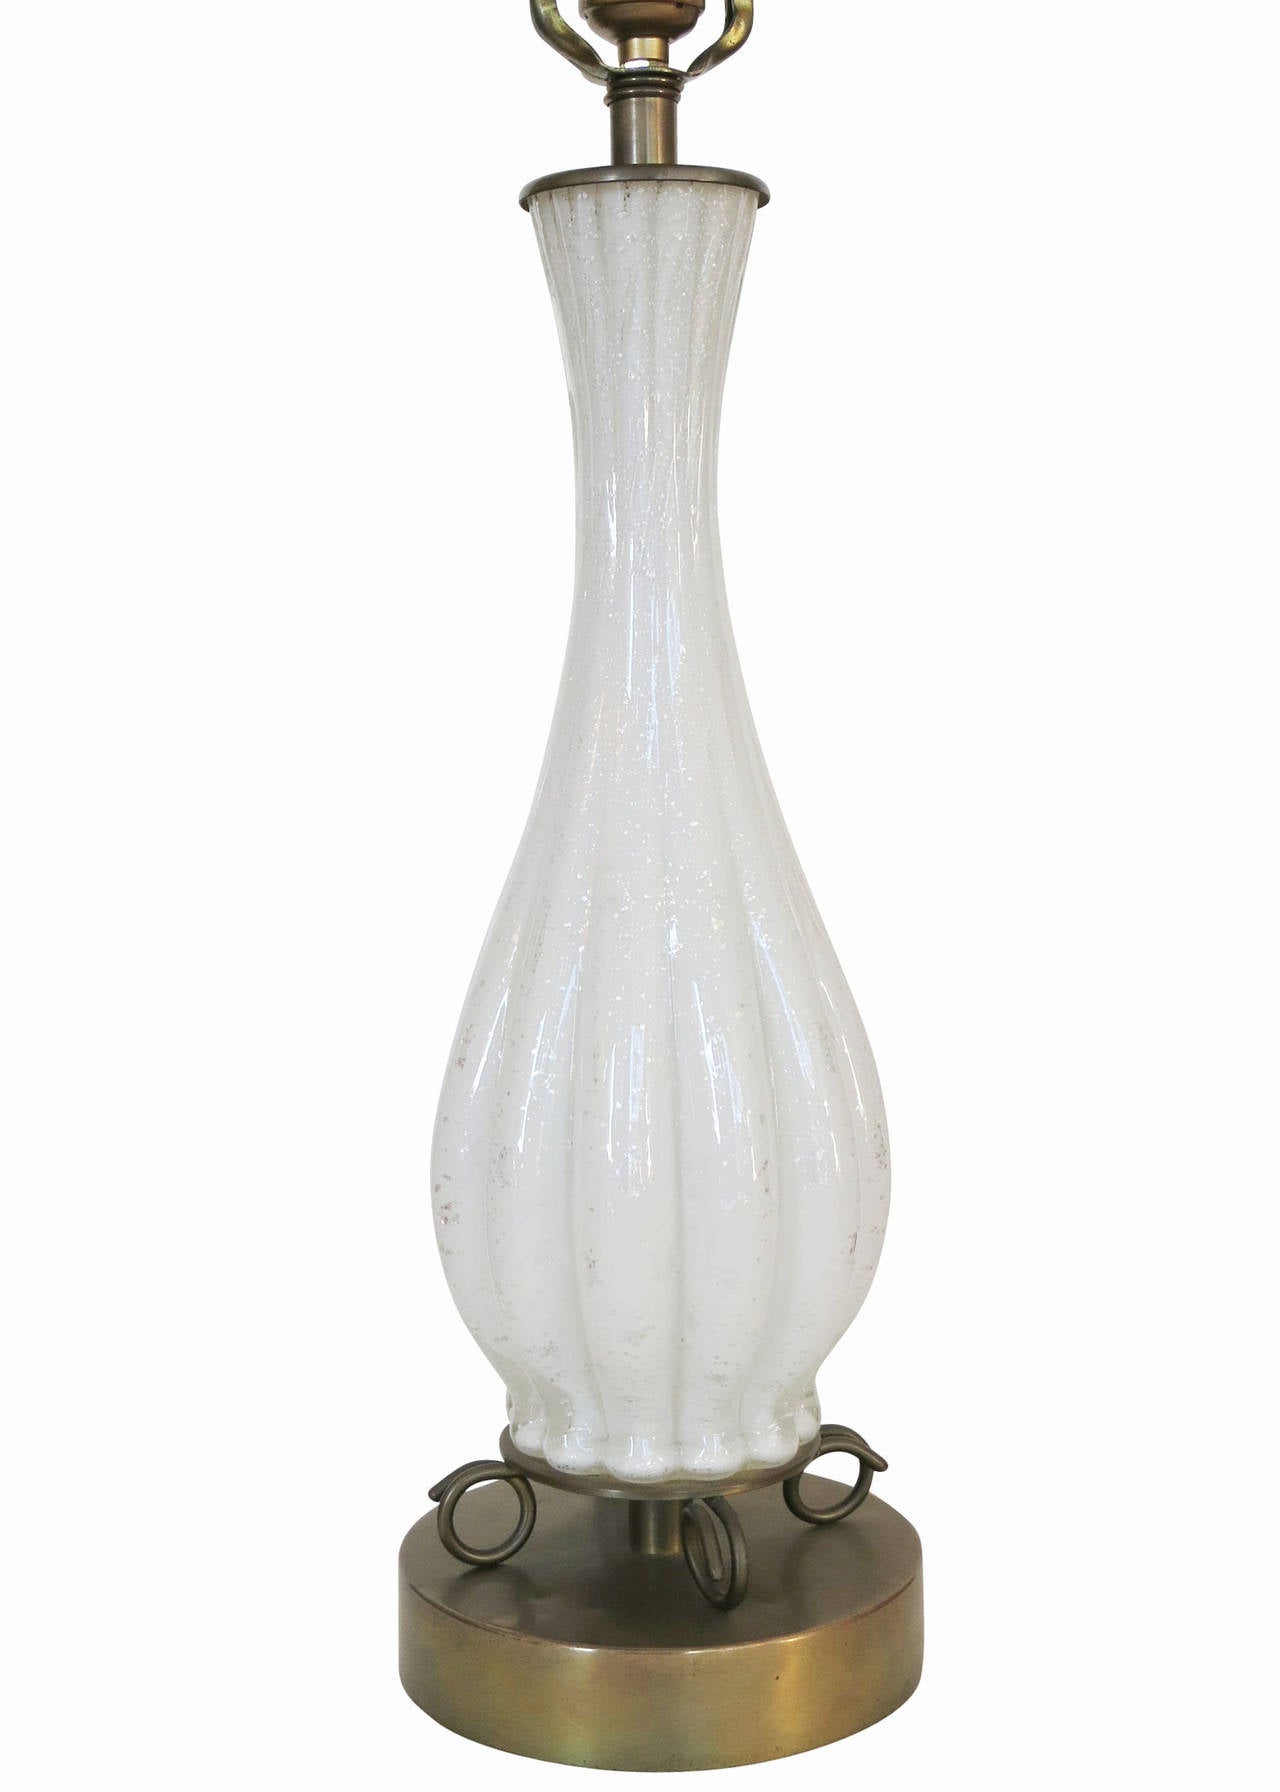 Pair of large elegant hand blown glass white Murano table lamps. The long stretched hour glass center piece is fixed to a decorative Midcentury brass base and finished with a brass top fitter.

The lamps feature a unique silver flake worked into